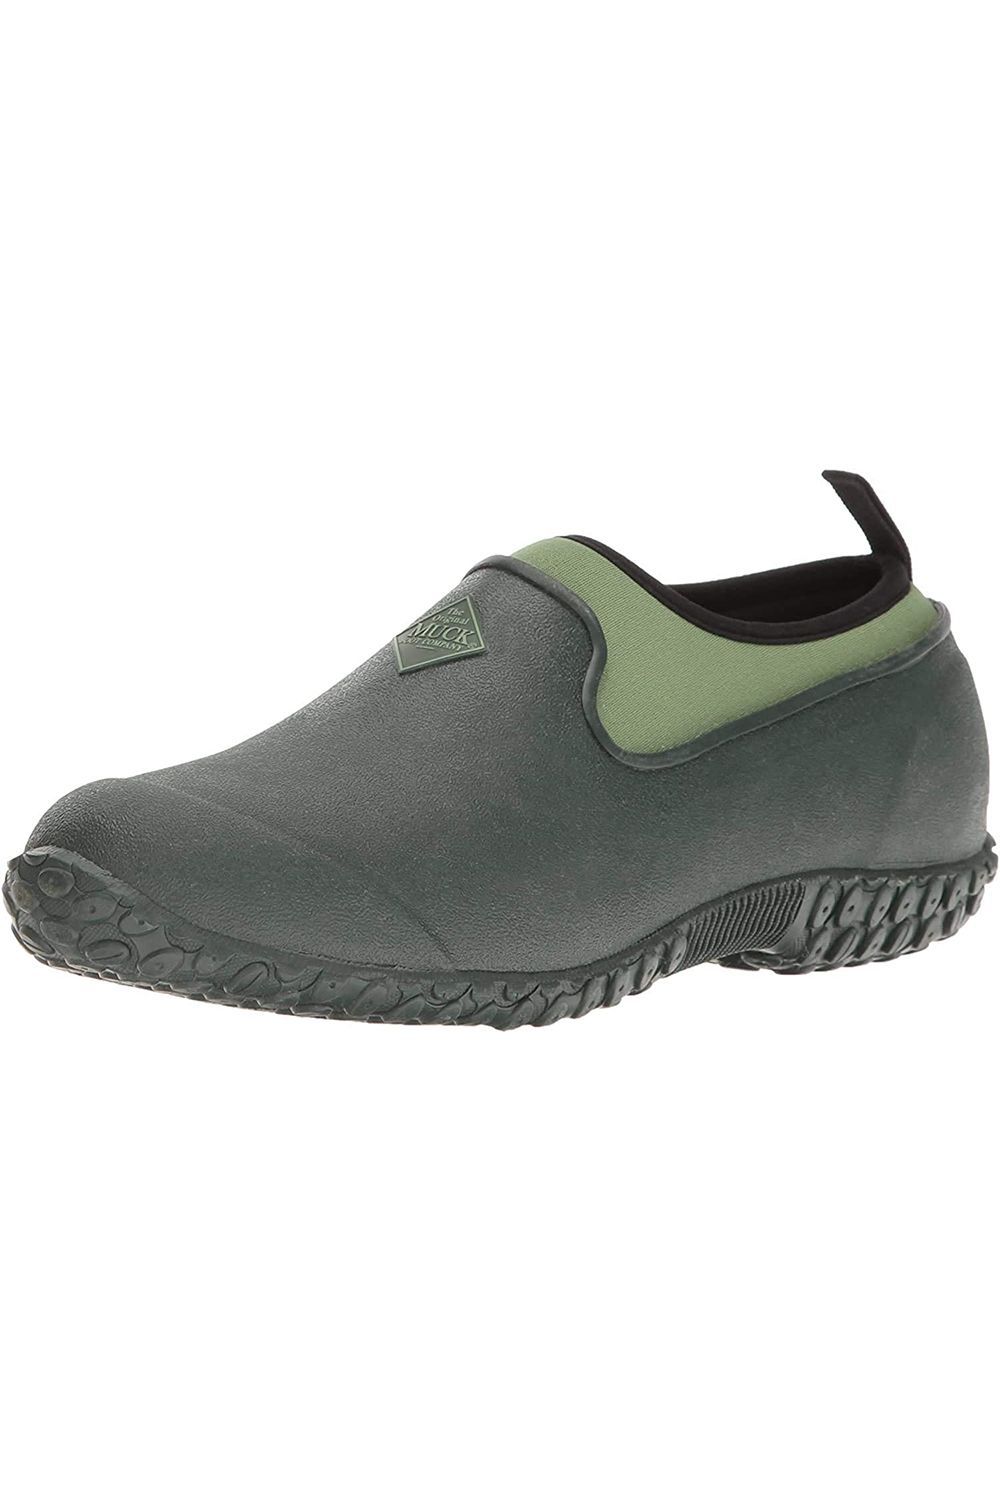 garden clogs with arch support